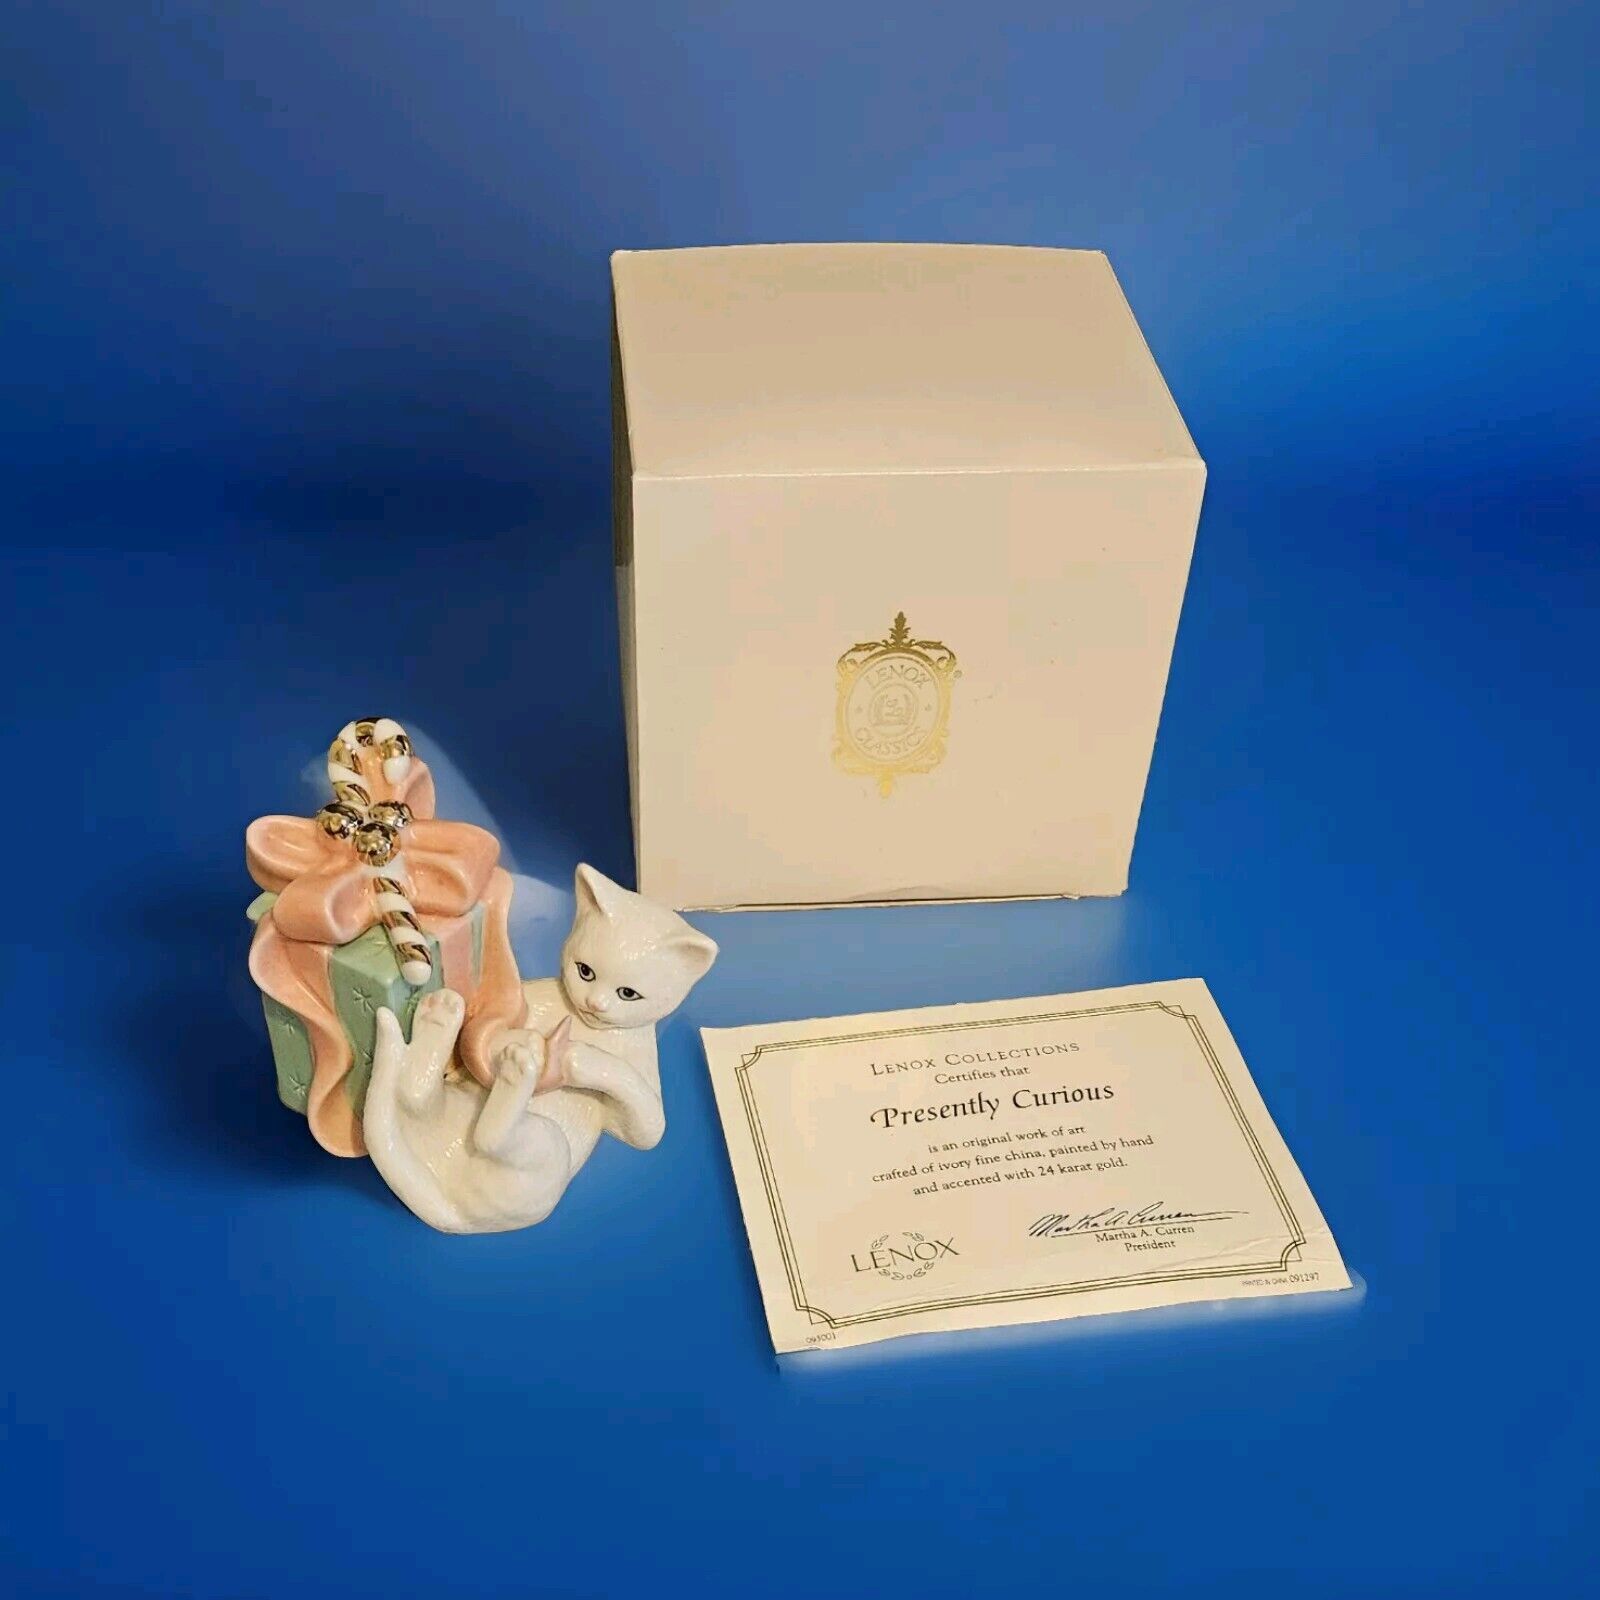 Lenox Presently Curious Kitty Cat With Gift Ceramic Figurine 24k Gold Accents